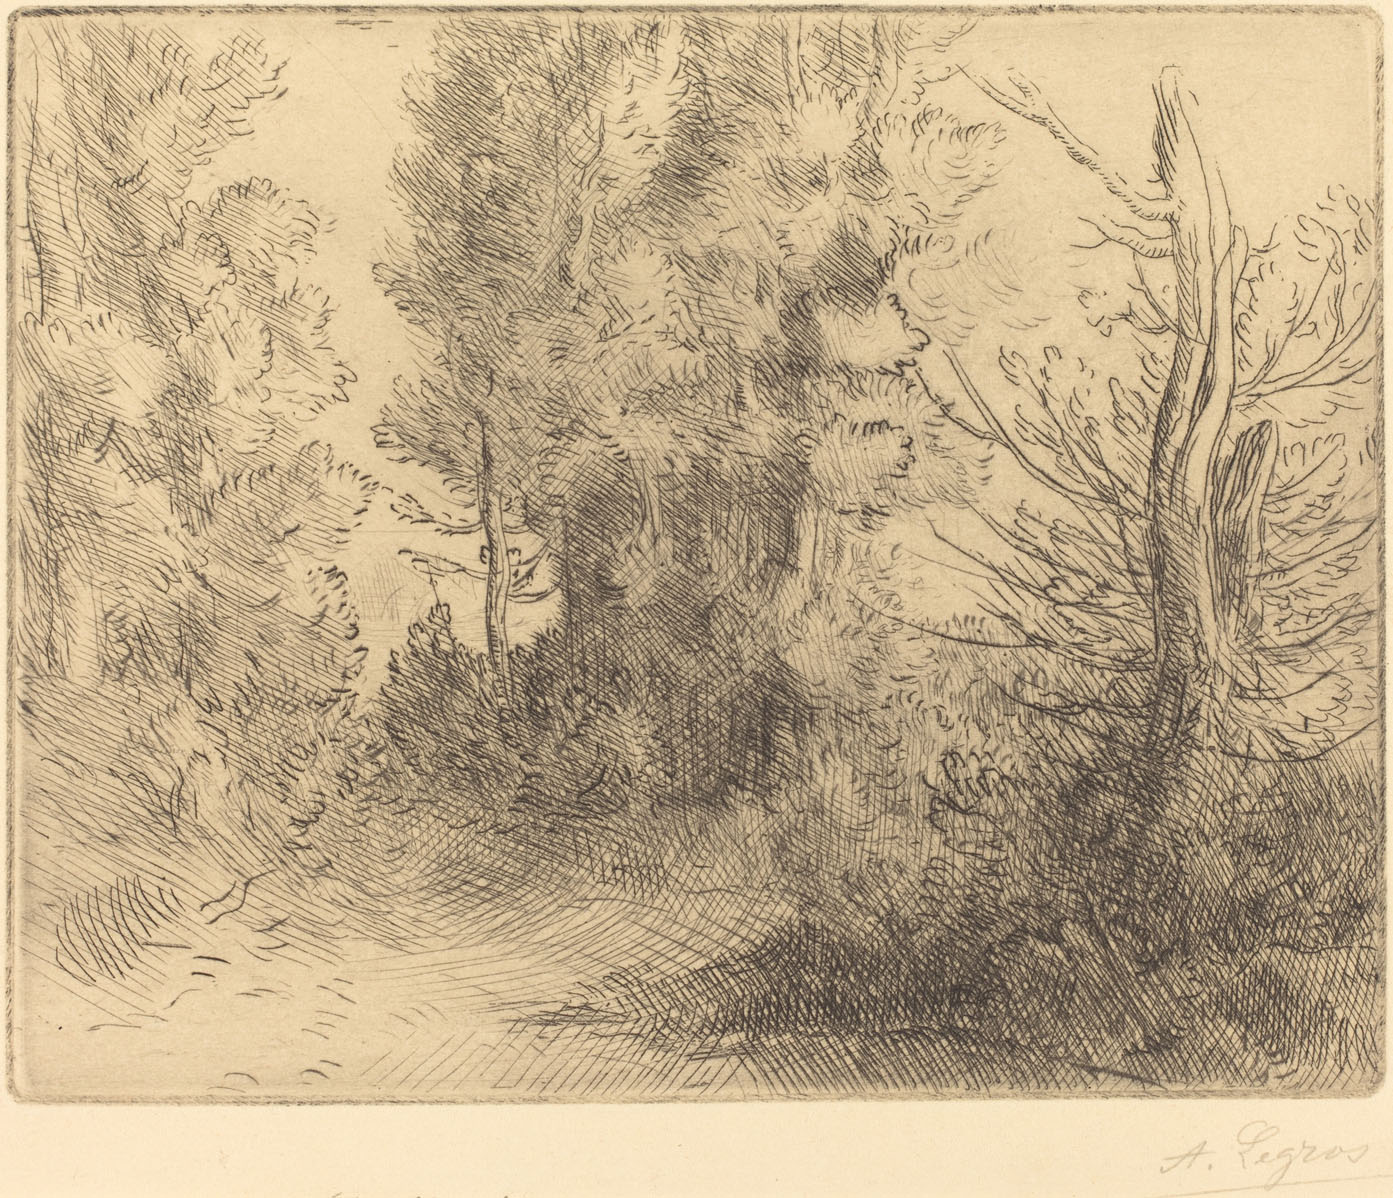 Alphonse Legros, Landscape: Near Chailleux (Paysage: Pres Chailleux), French, 1837 - 1911, , etching and drypoint?, Gift of George Matthew Adams in memory of his mother, Lydia Havens Adams